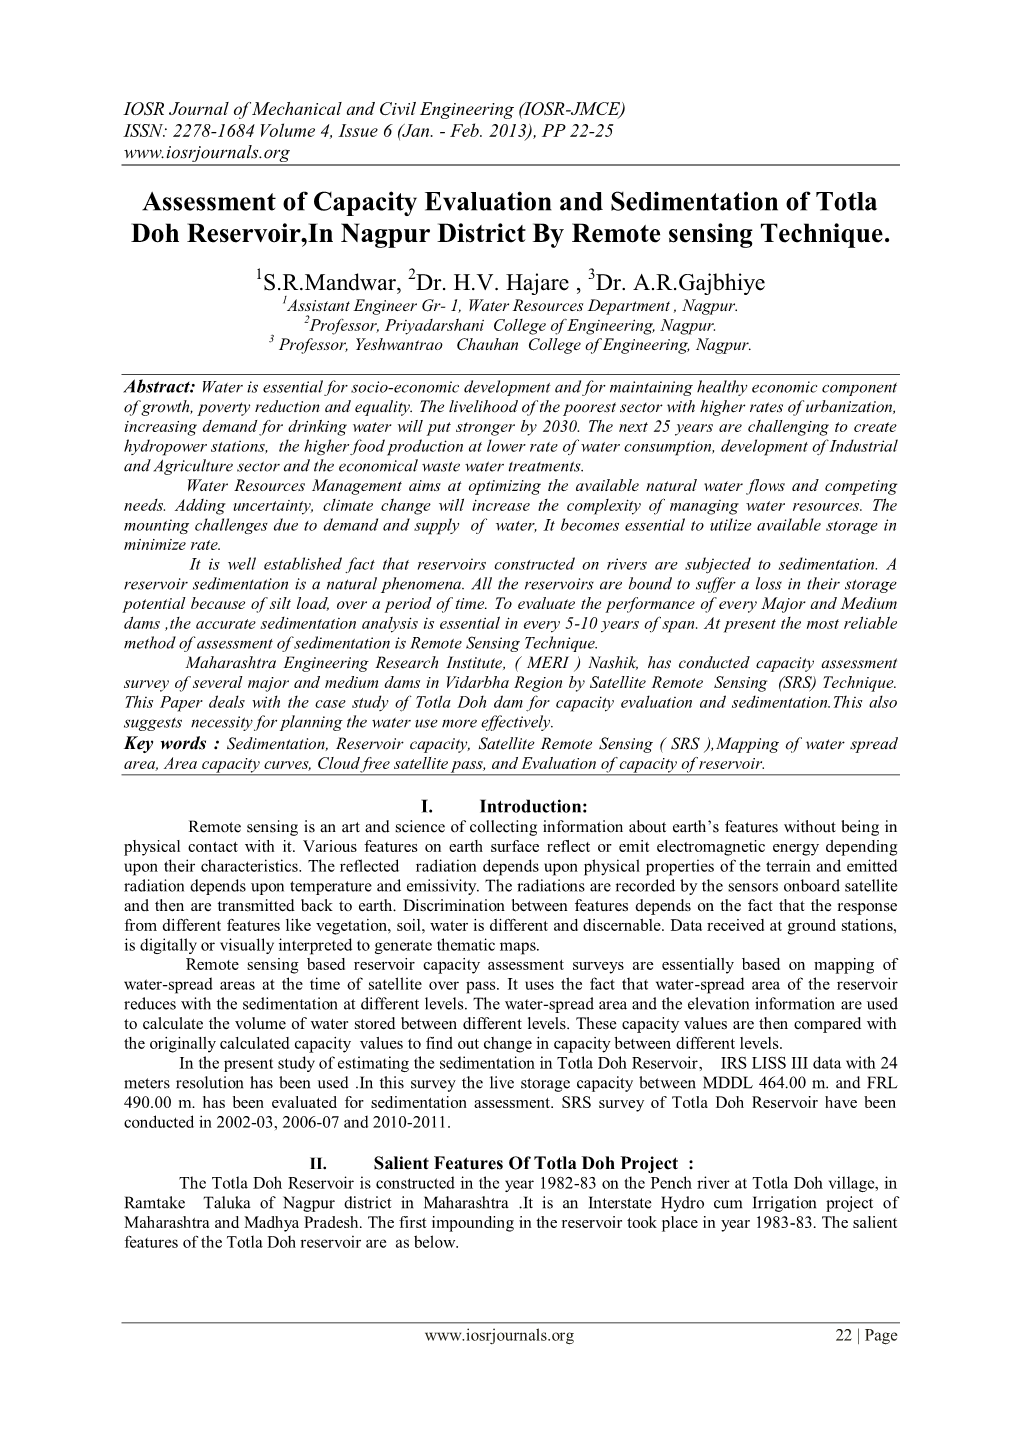 Assessment of Capacity Evaluation and Sedimentation of Totla Doh Reservoir,In Nagpur District by Remote Sensing Technique